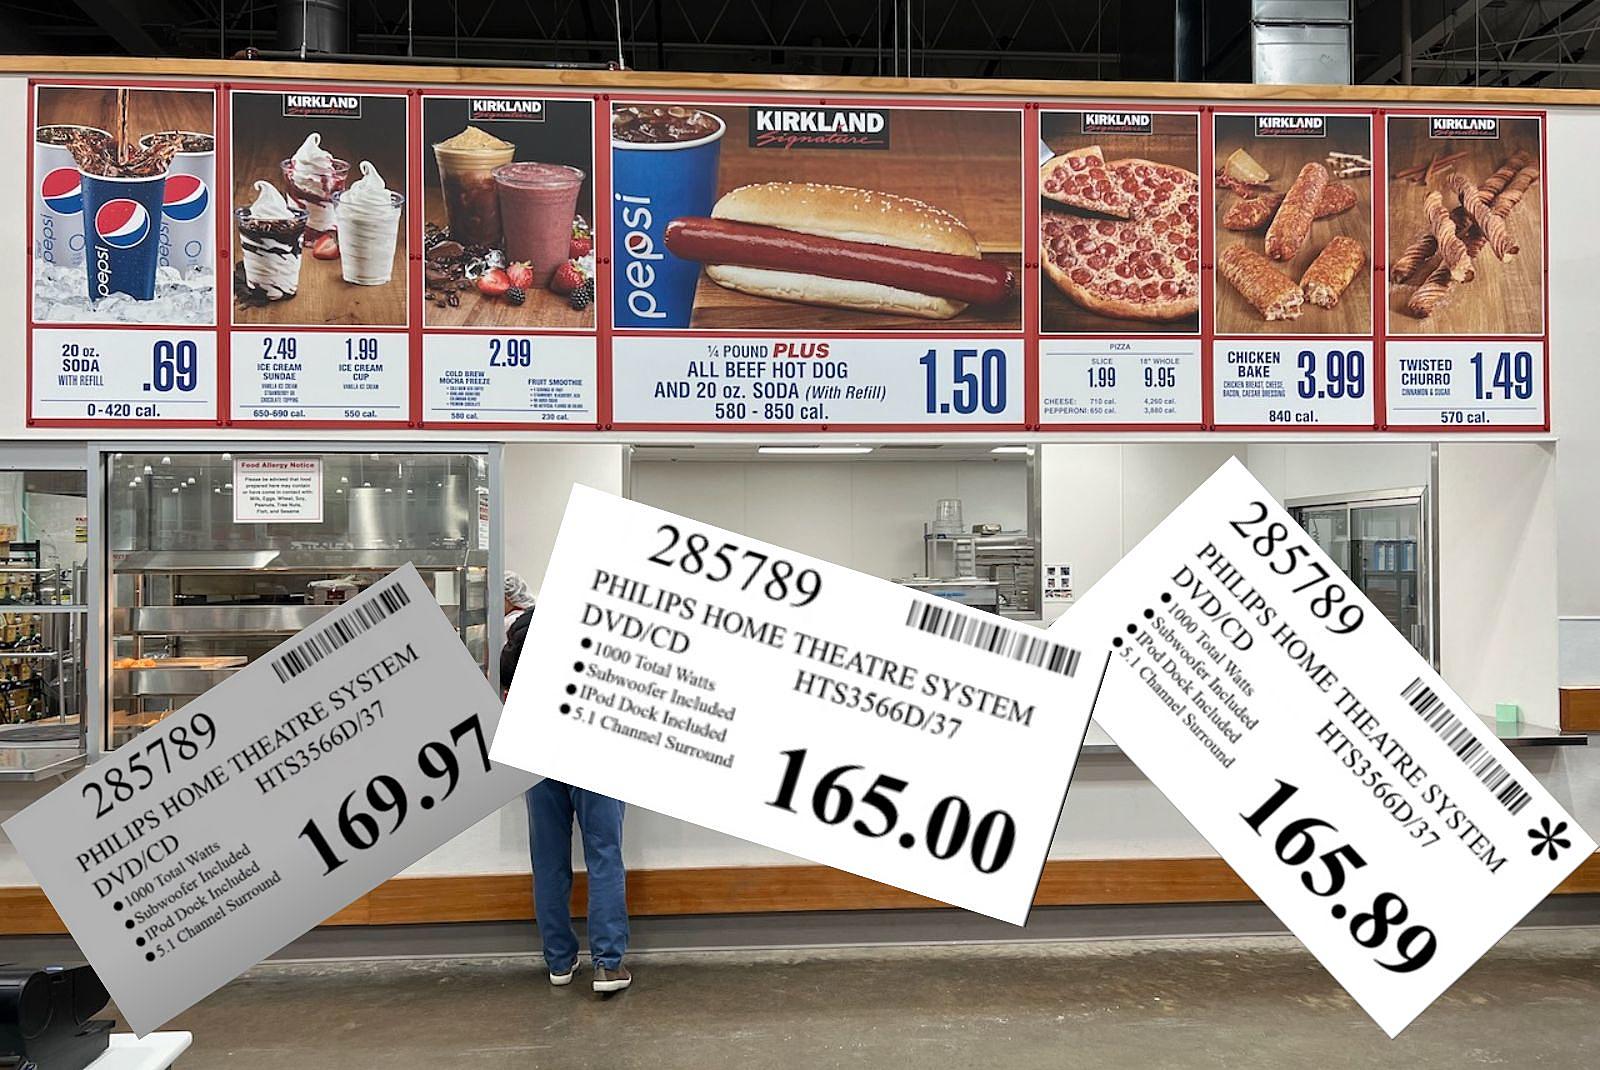 Costco Price Tag Meanings